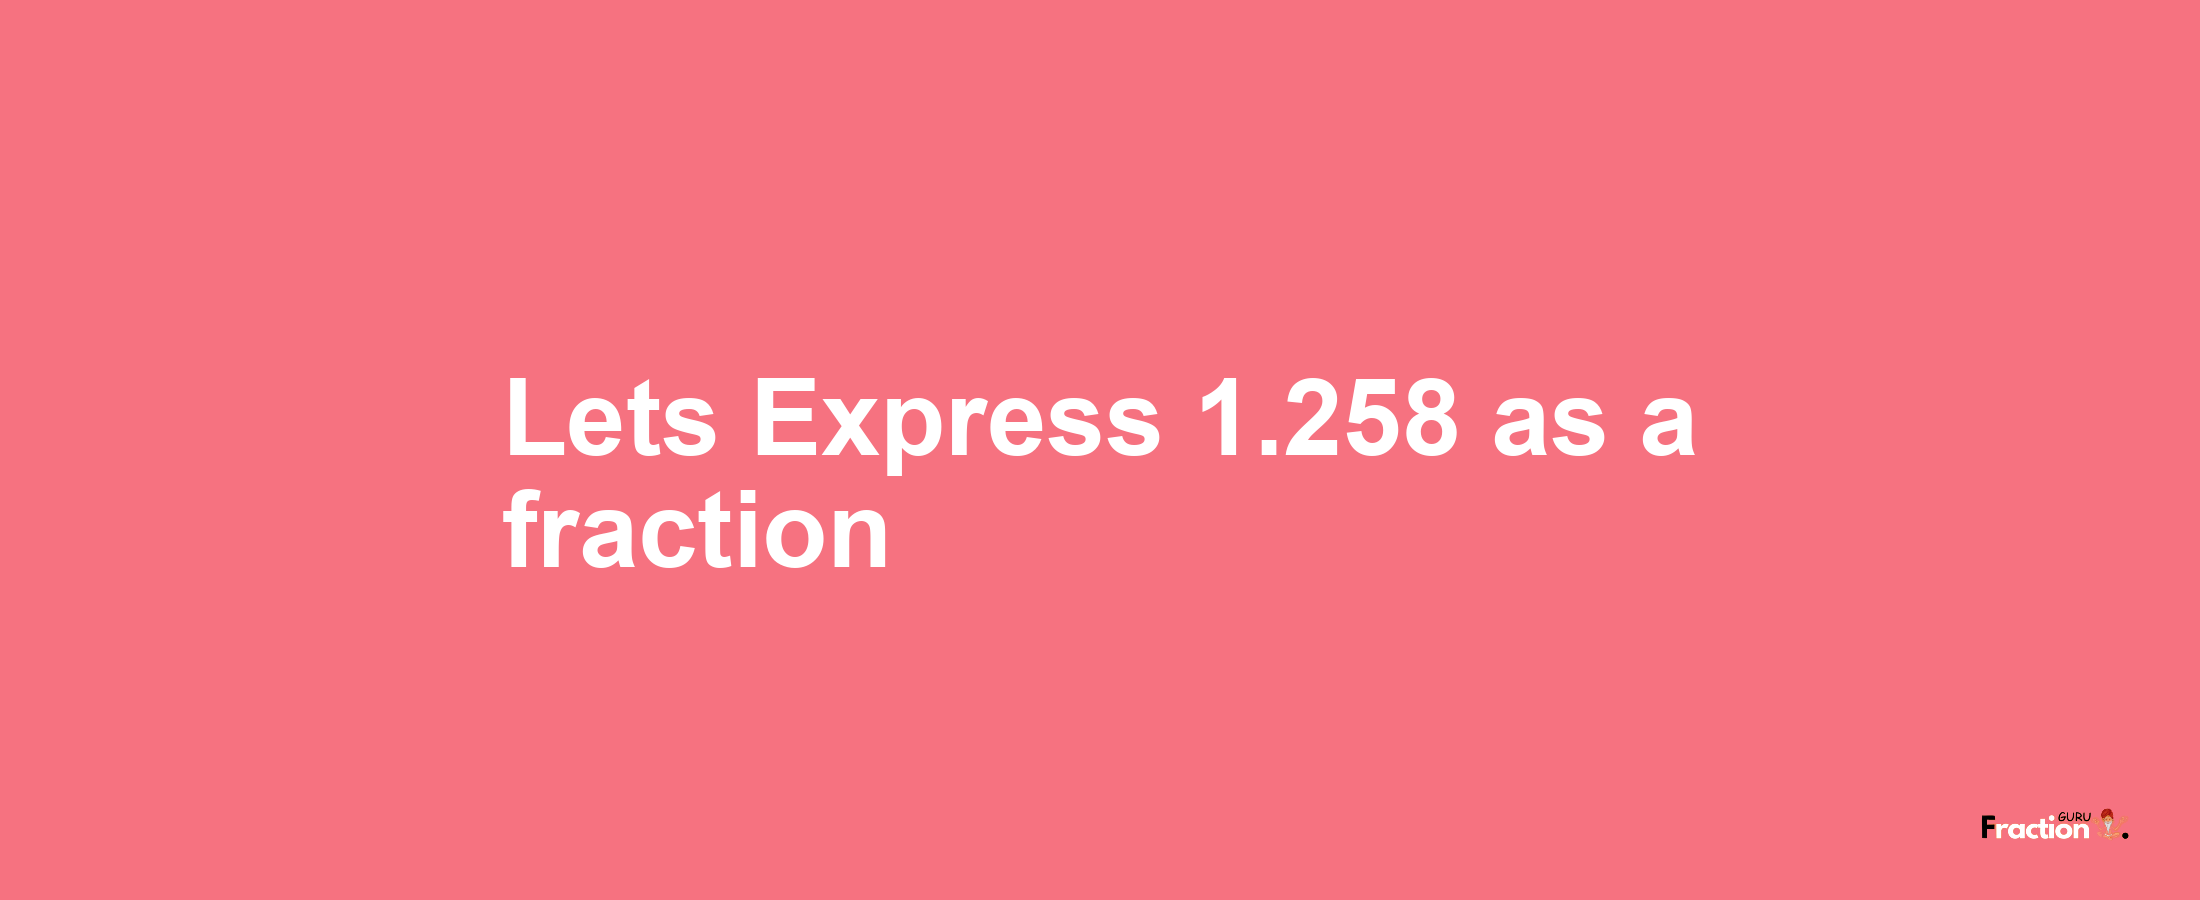 Lets Express 1.258 as afraction